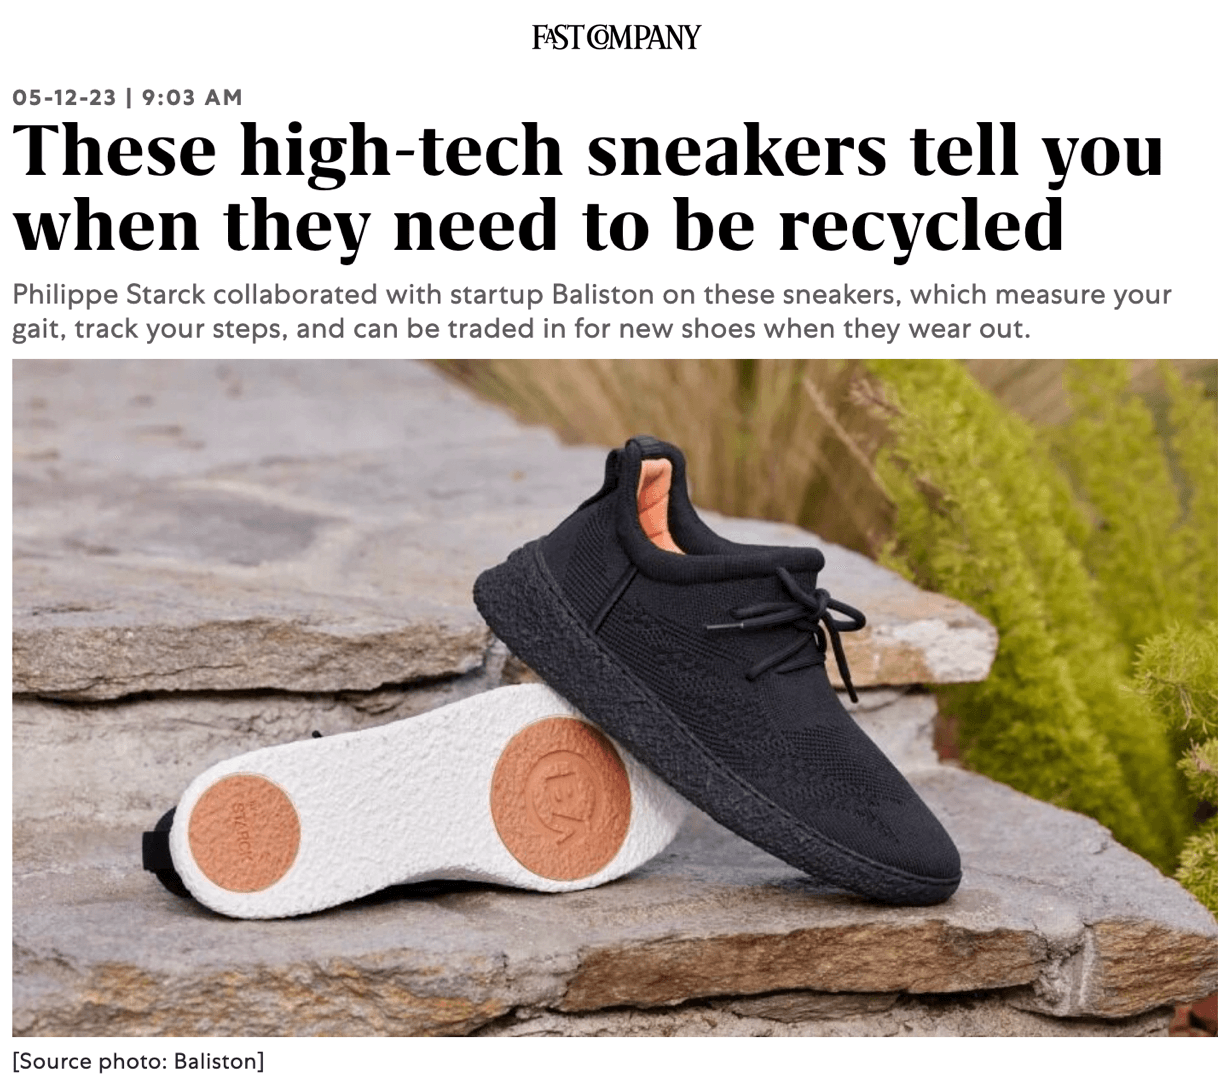 These high-tech sneakers tell you when they need to be recycled